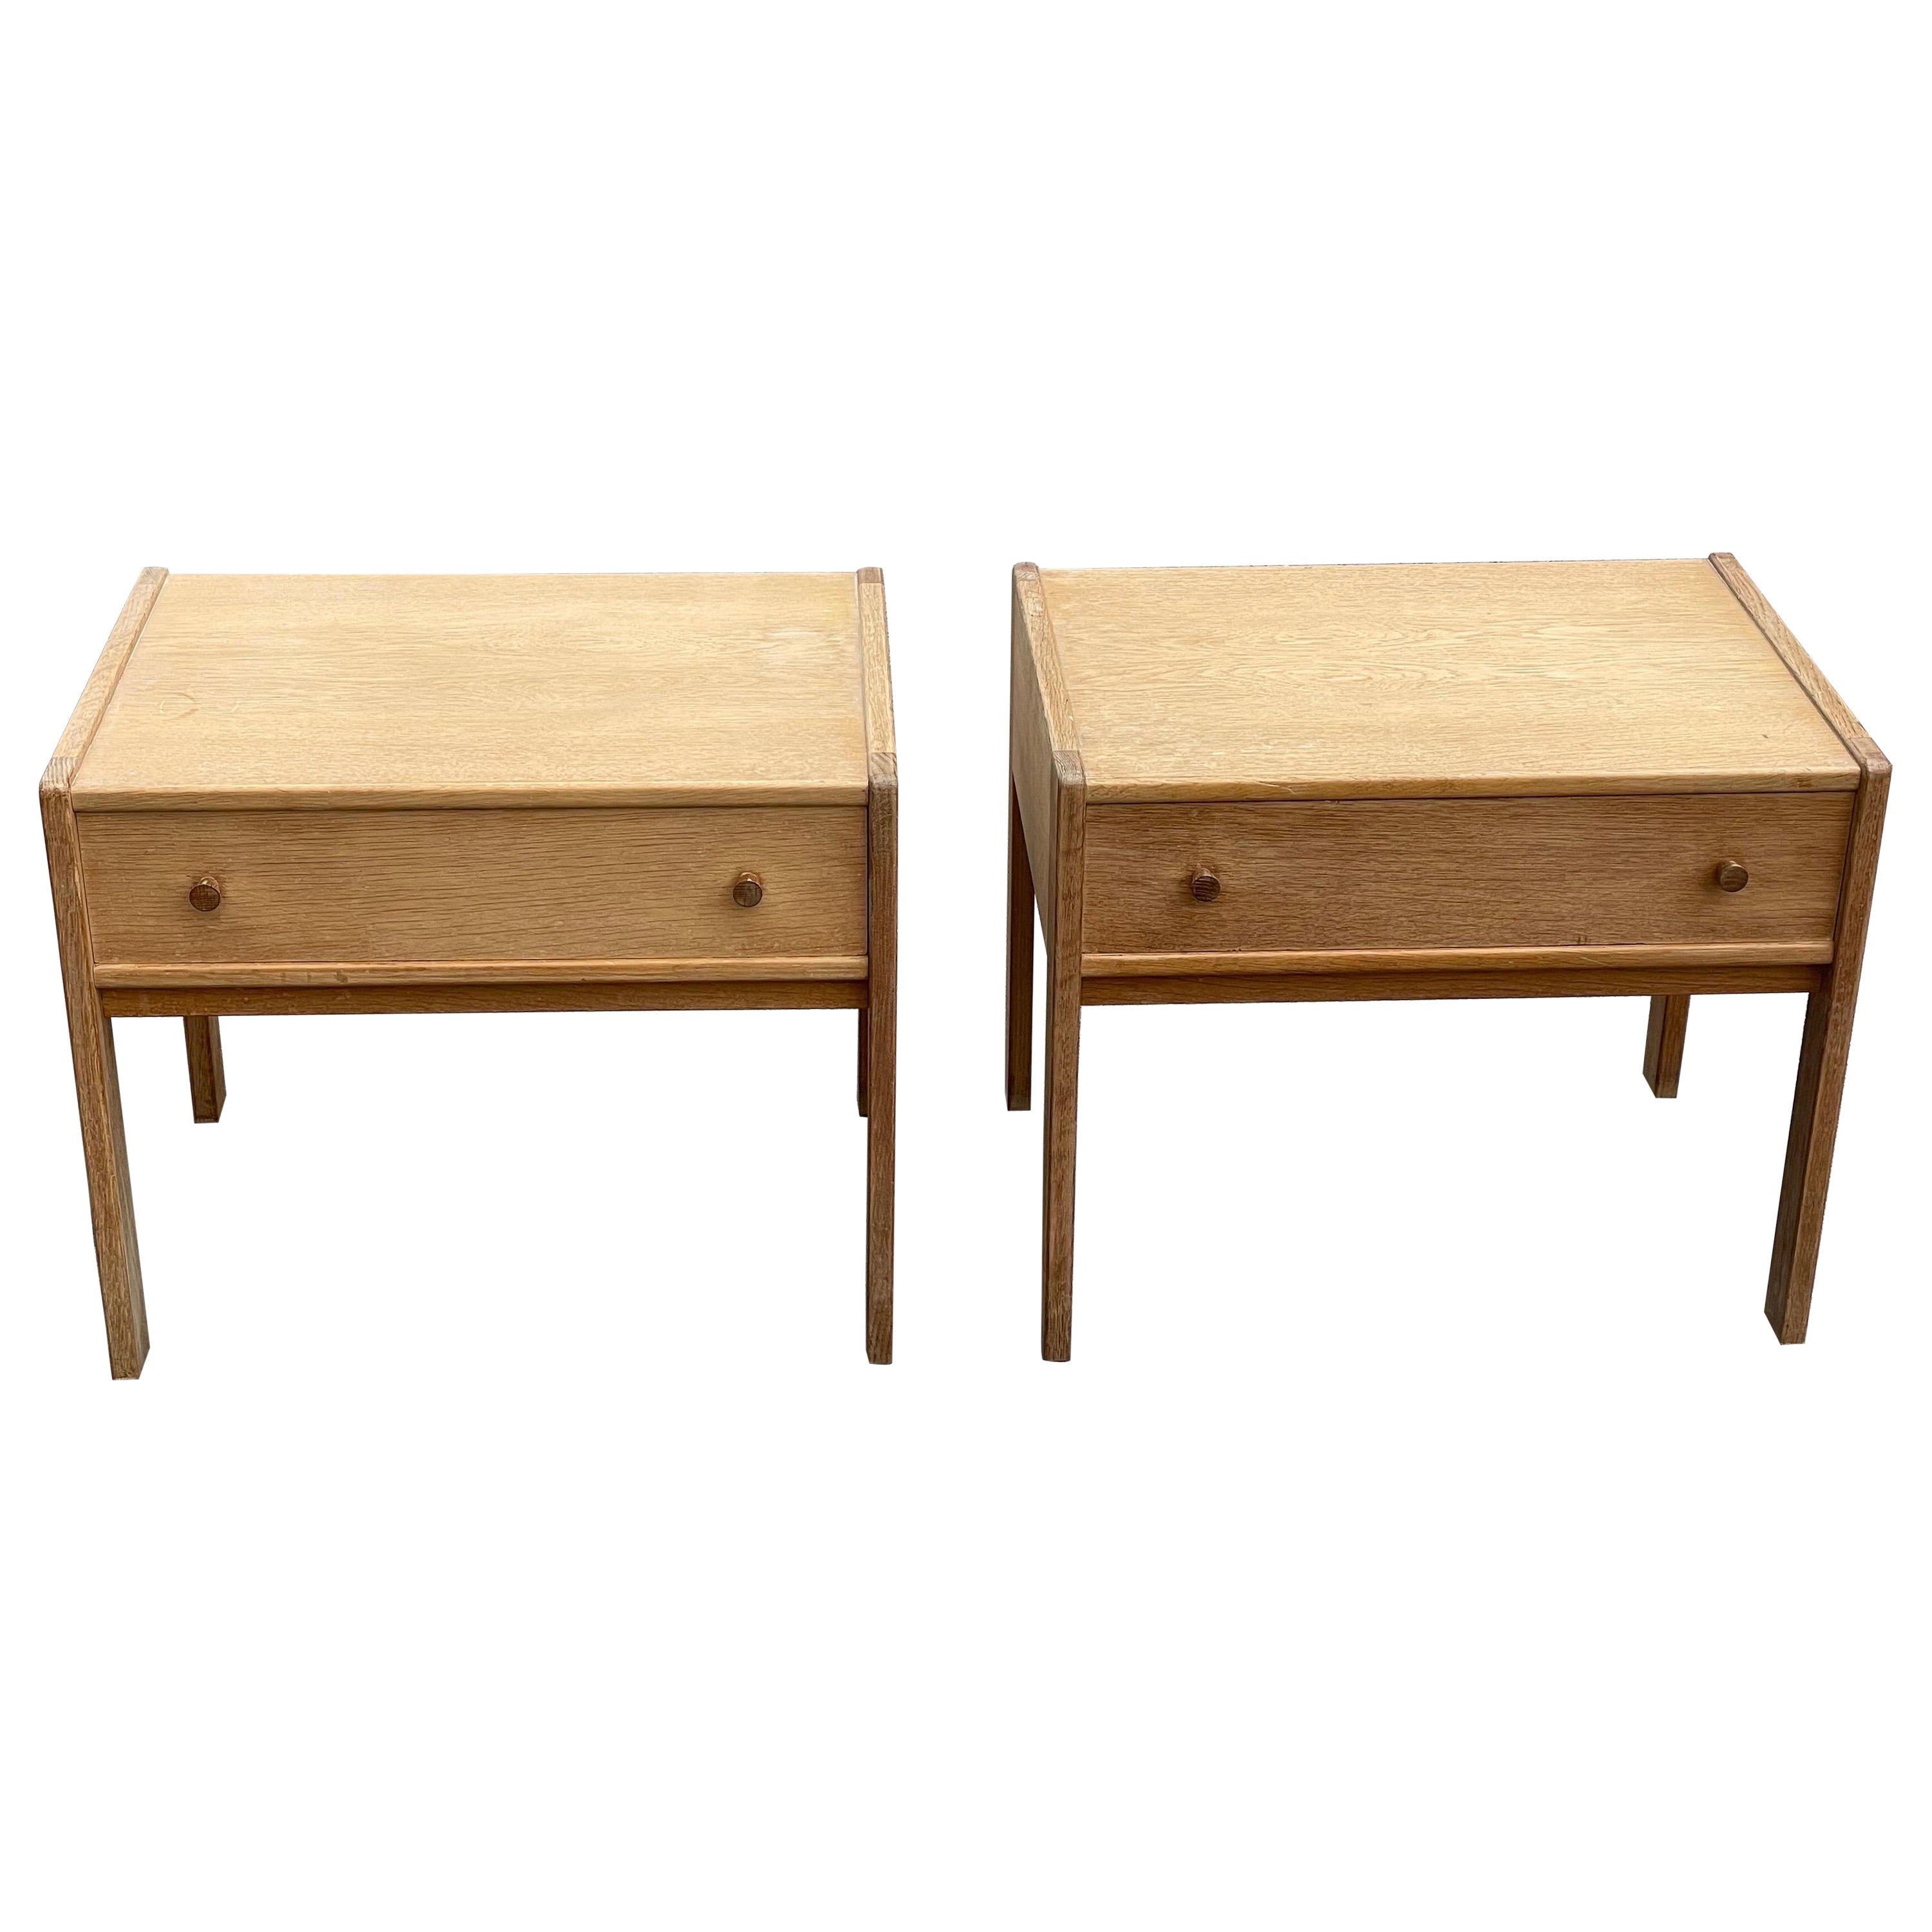 A set of simple Danish oak nightstands from the 1960´s